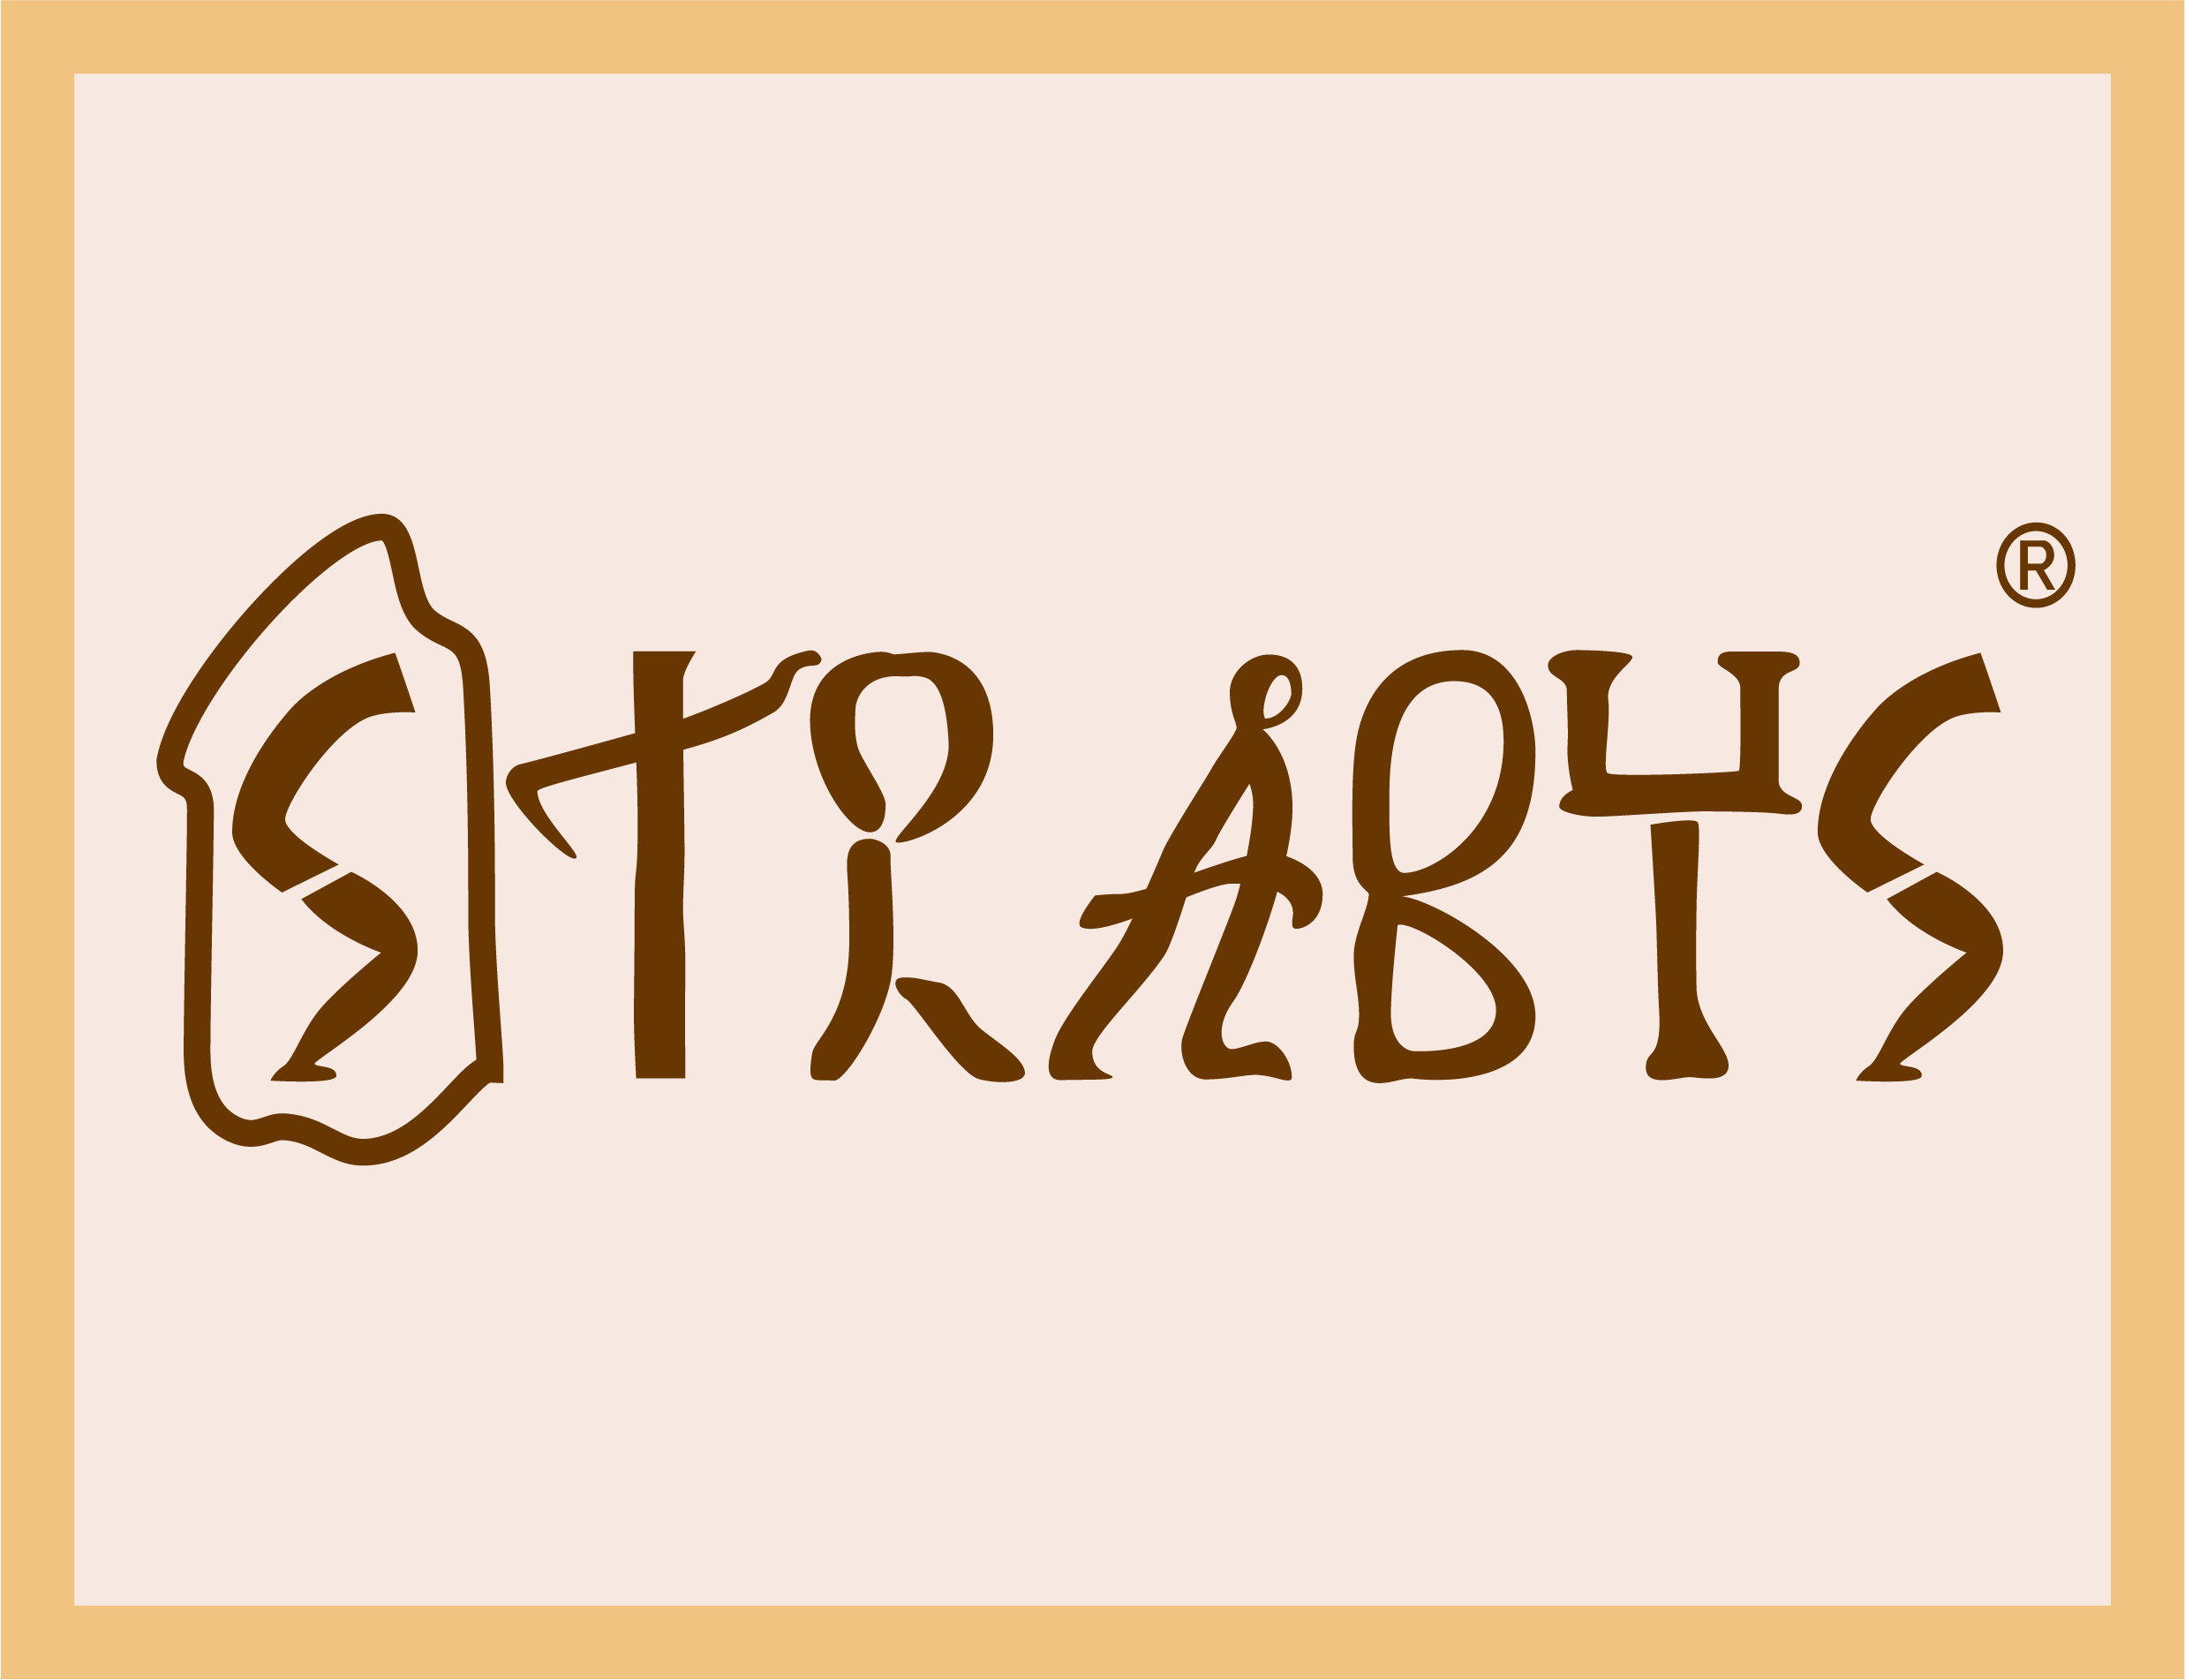 Logo of STRABYS - the research product that is the 'business strategy assessor'